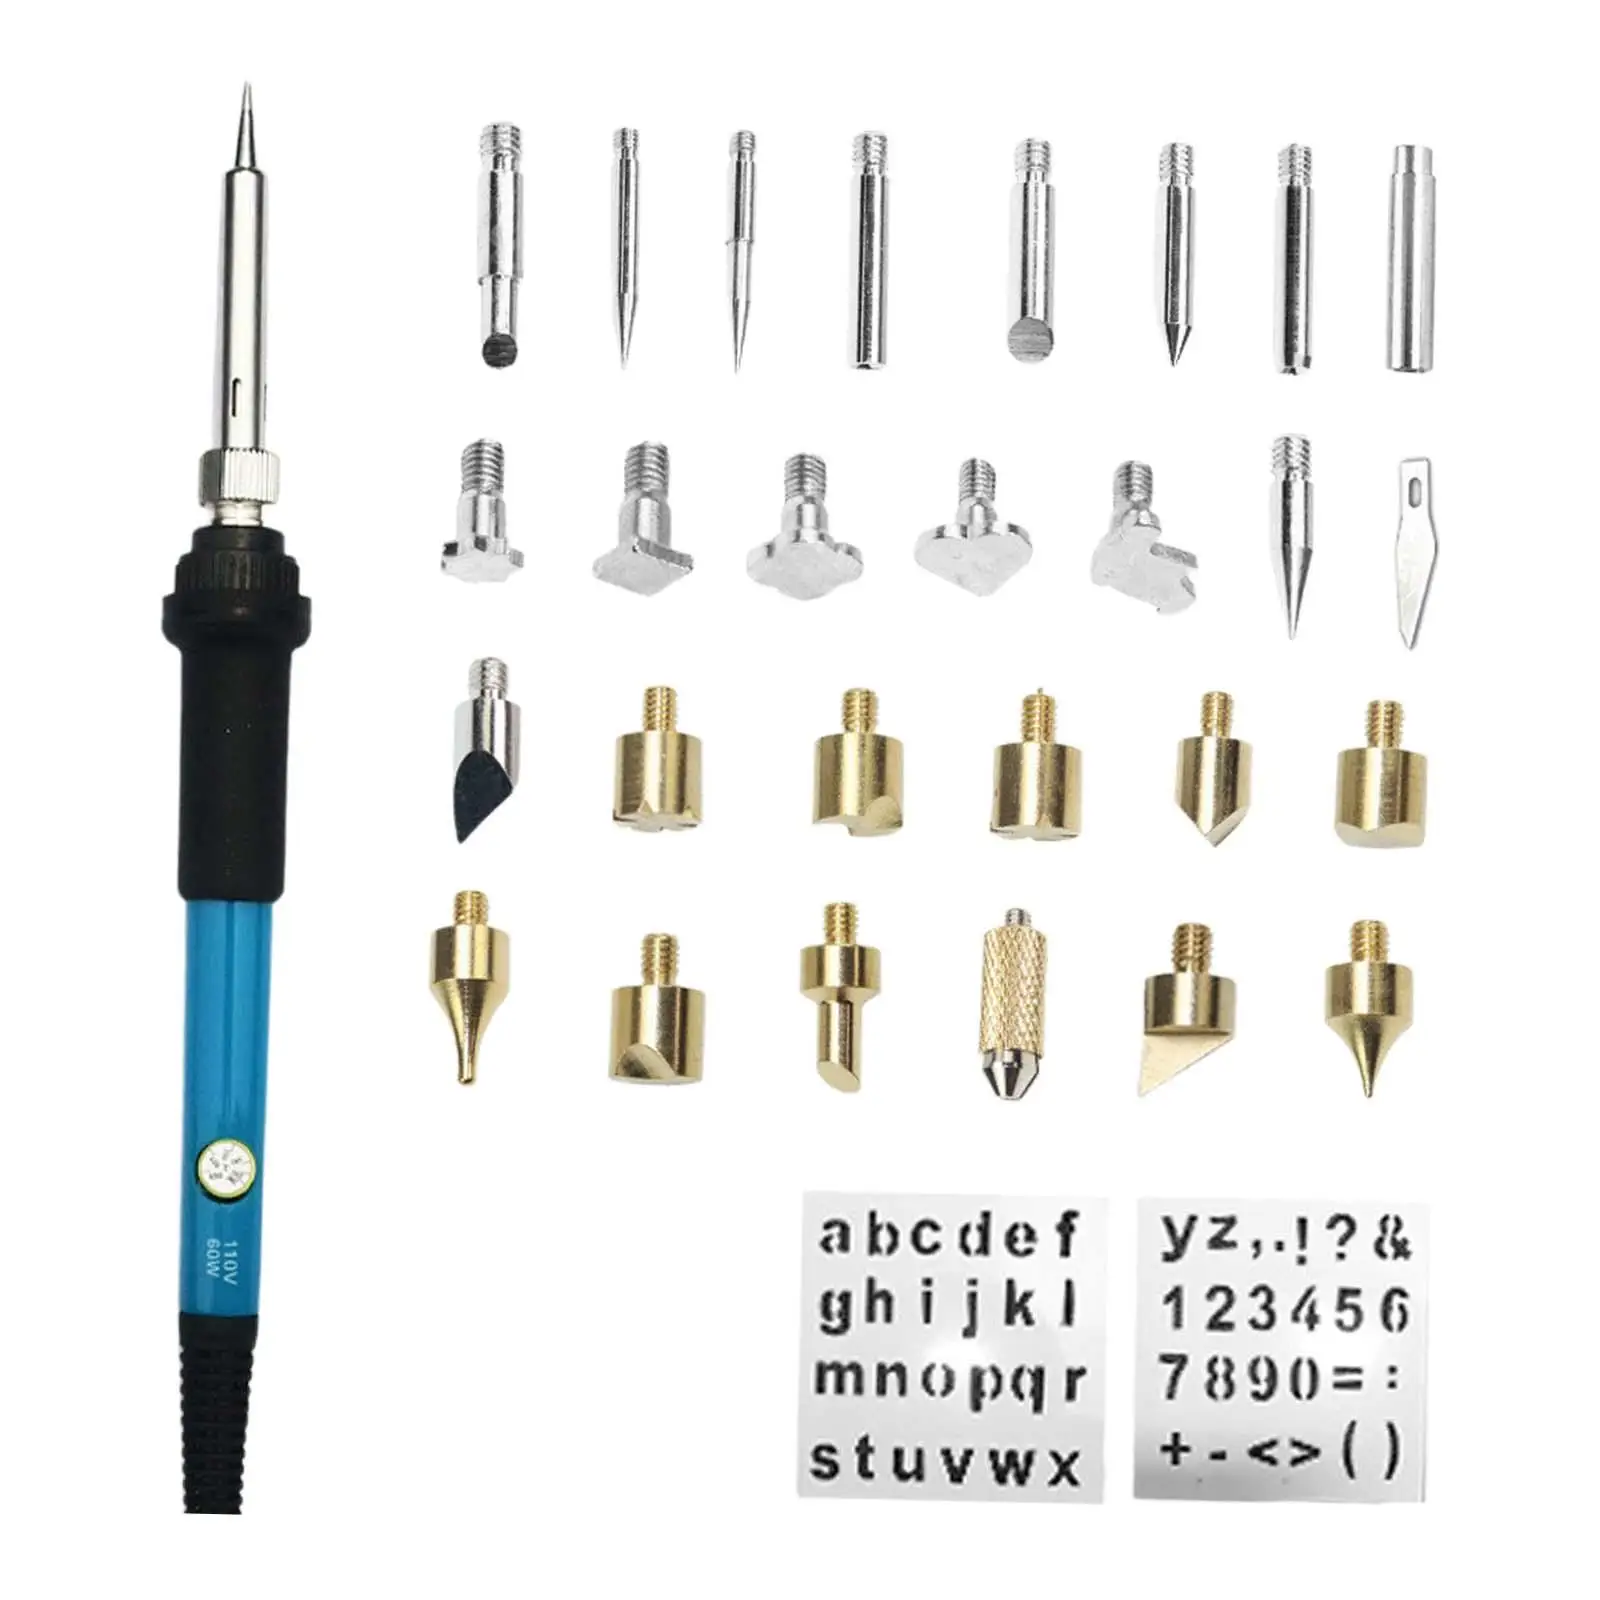 30x Solder Iron Tool Professional Electric Digital Display Welding Tool Portable DIY with Soldering Tips 60W Soldering Iron Set